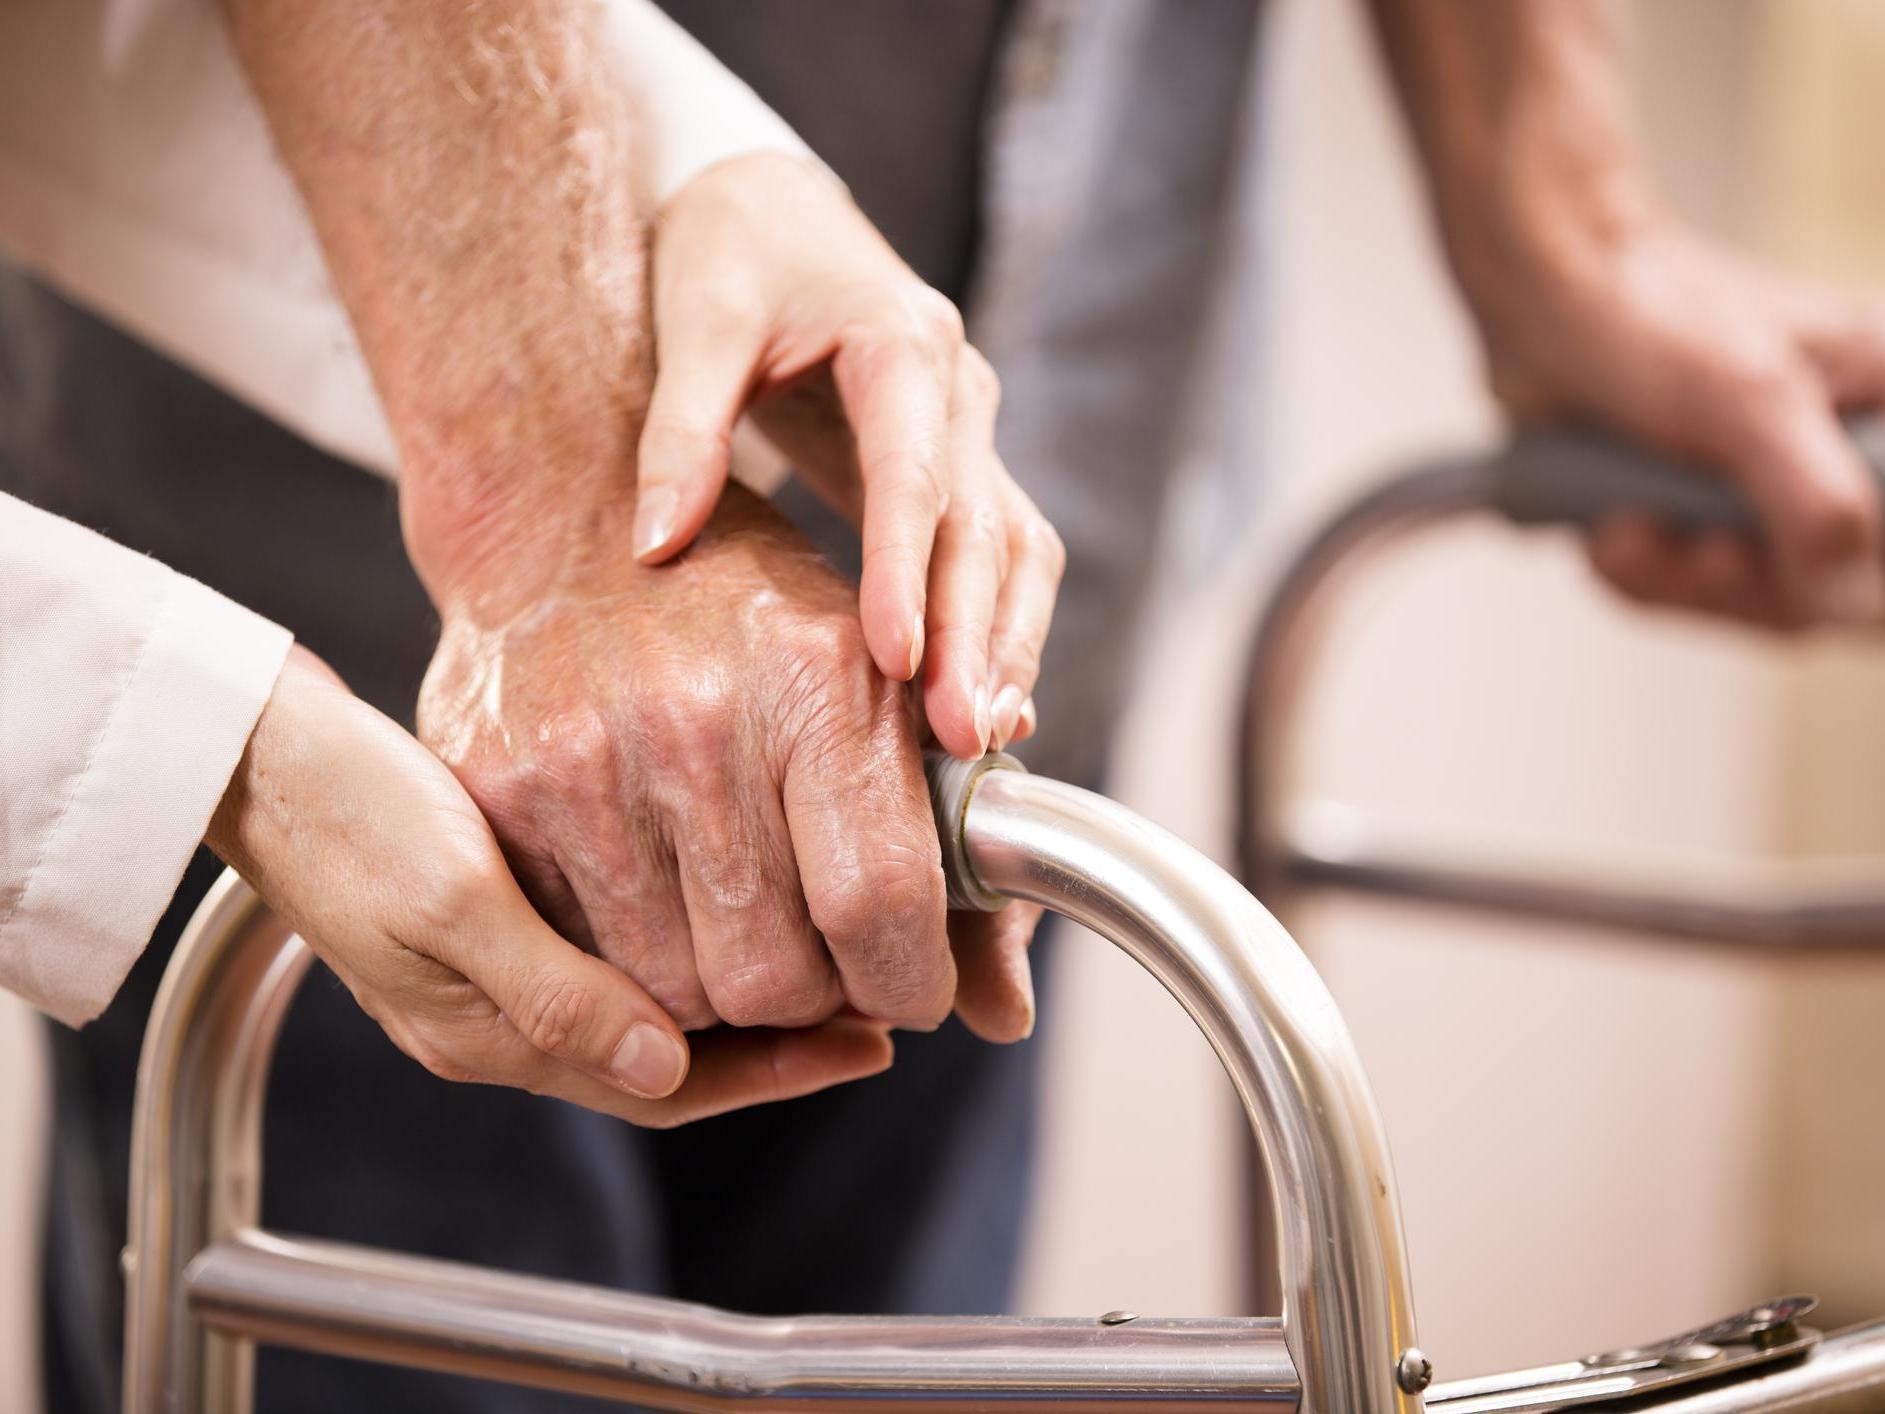 Care homes were not supported at the height of the crisis, a new survey shows